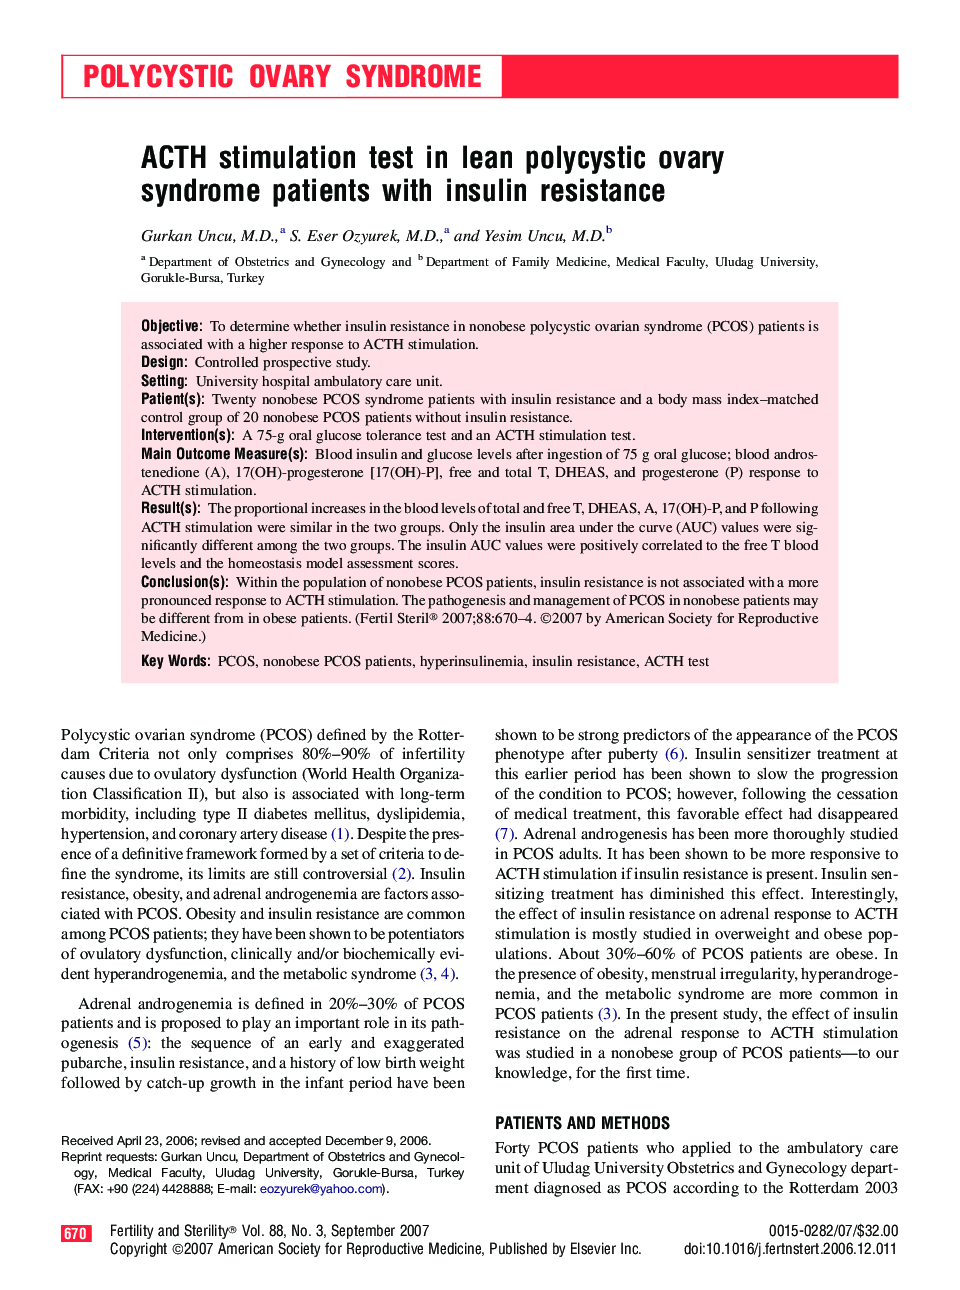 ACTH stimulation test in lean polycystic ovary syndrome patients with insulin resistance